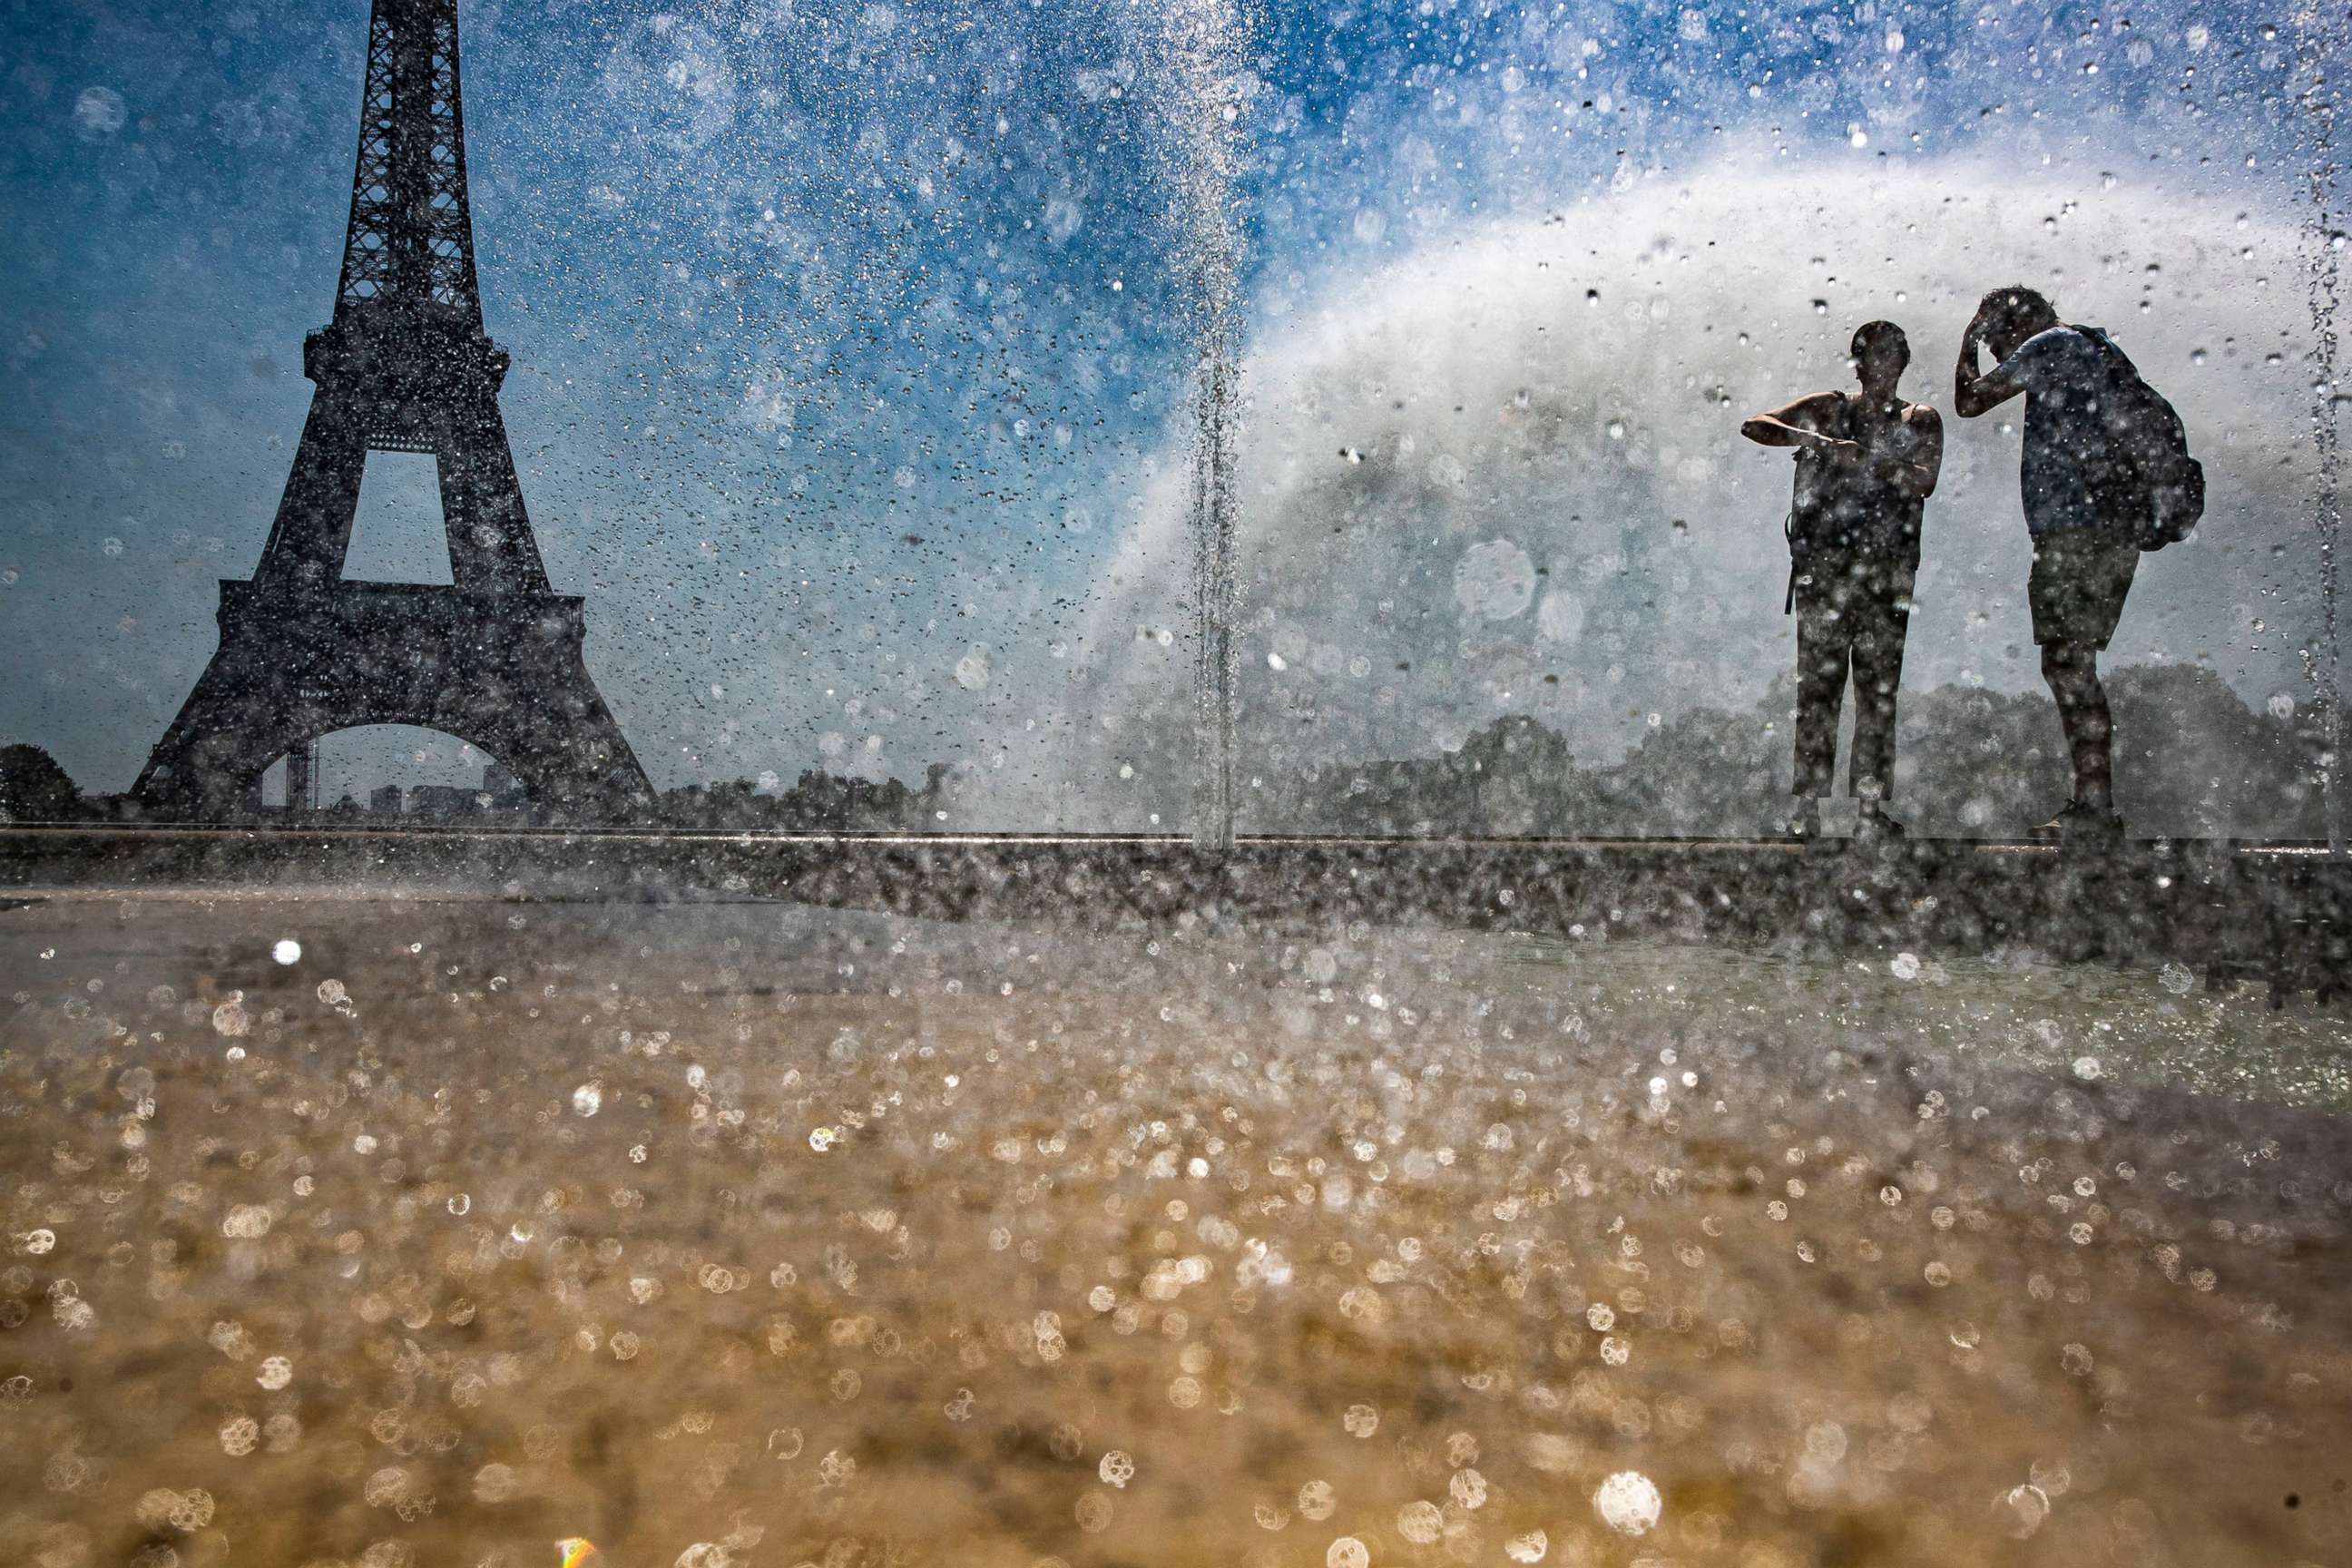 PHOTO: People cool down at the Gardens of the Trocadero in Paris, July 23, 2019.